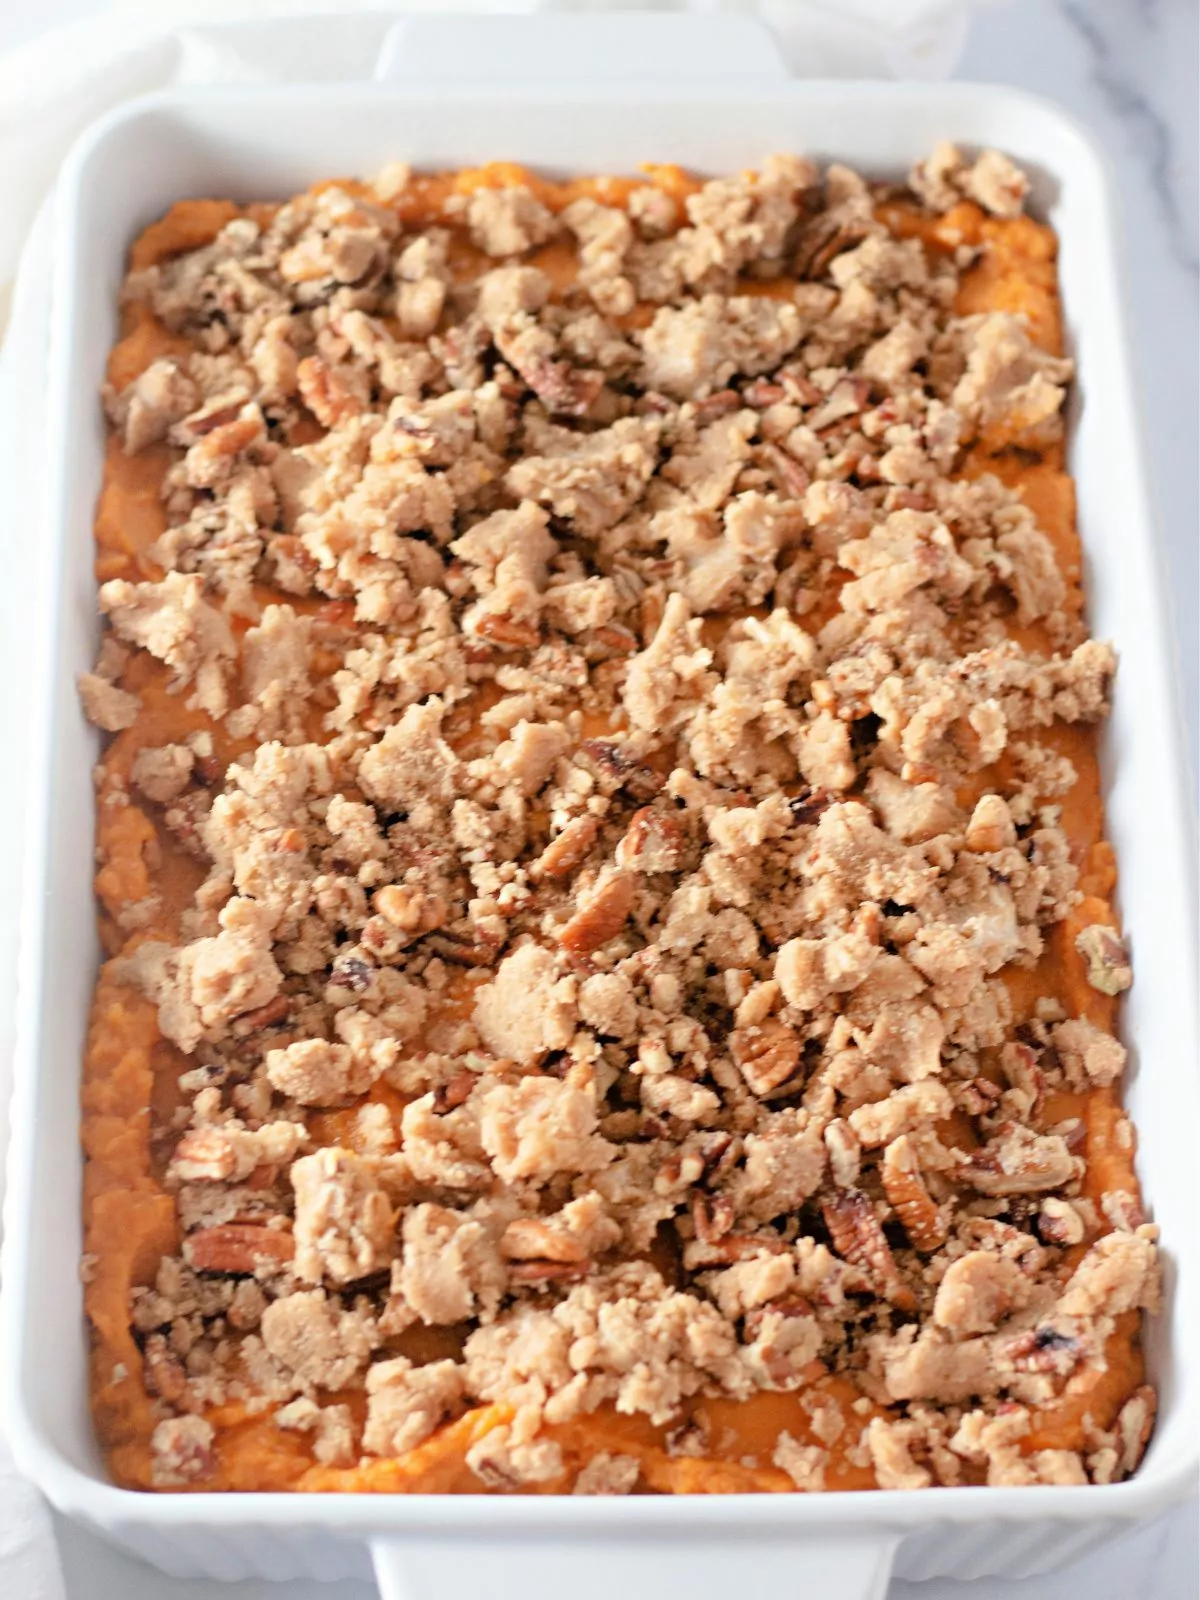 brown sugar crumble on top of unbaked sweet potato casserole.